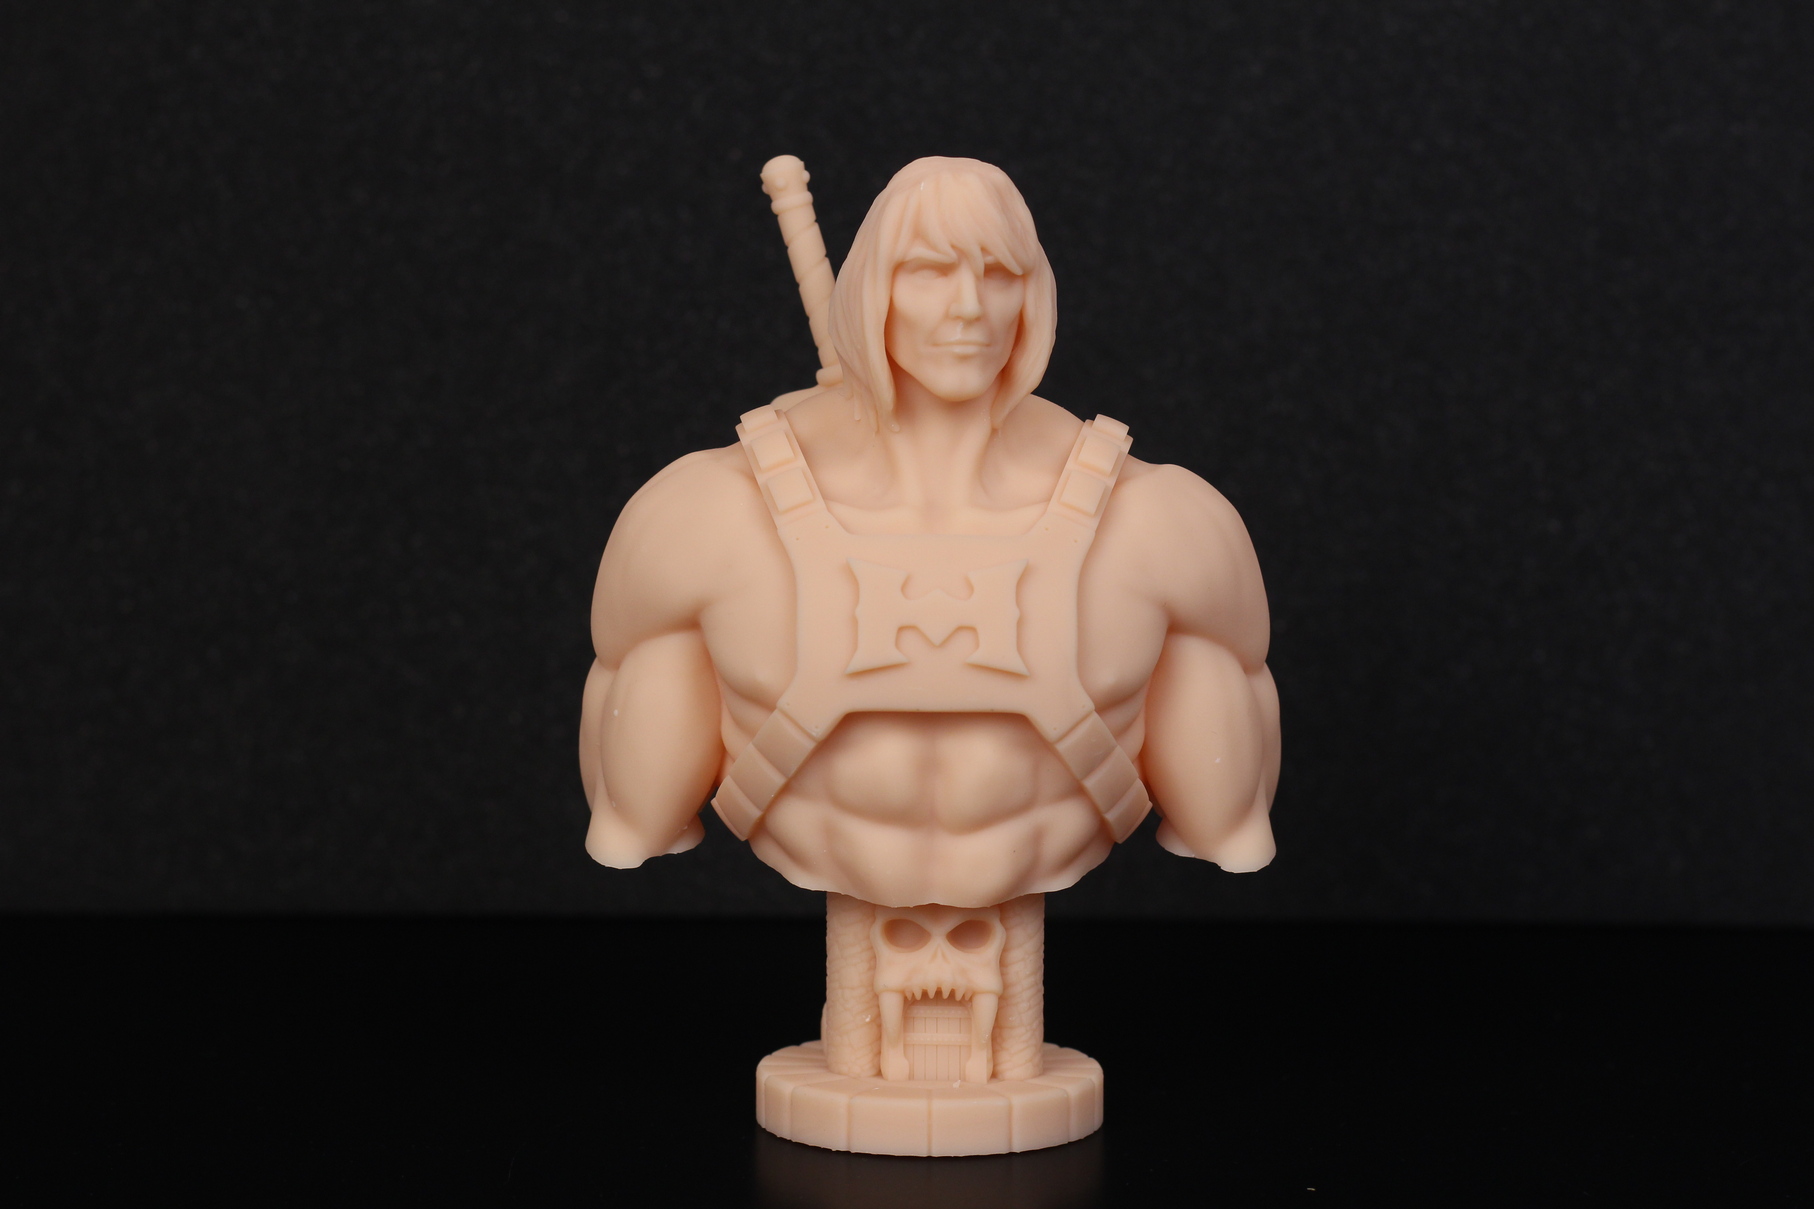 He Man Bust Halot Sky Review 6 | Creality HALOT SKY Review: Worthy of the Premium Price?